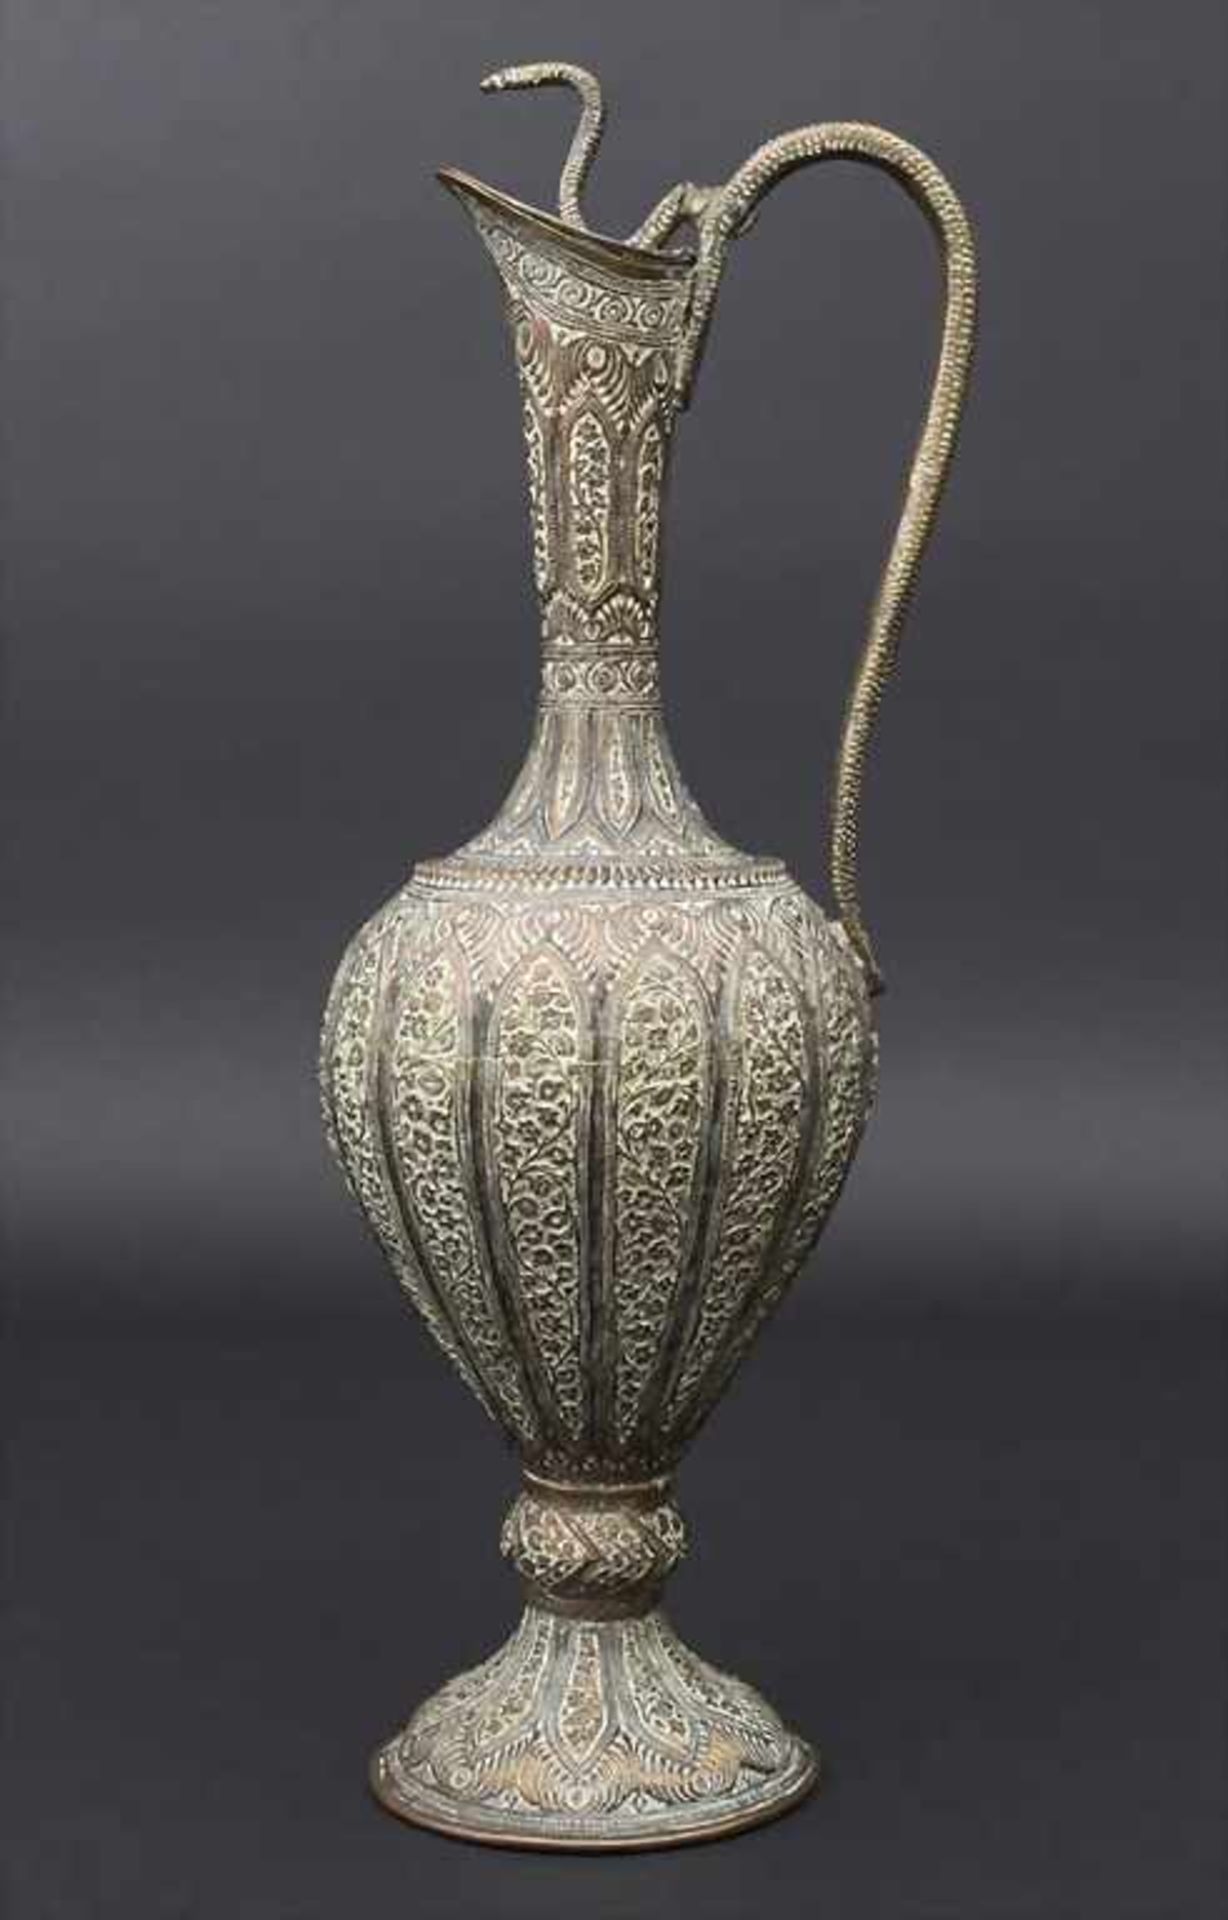 Kanne mit Schlangendaumenrast / A carafe with snake shaped thumb-rest, Persien, wohl 1780Material: